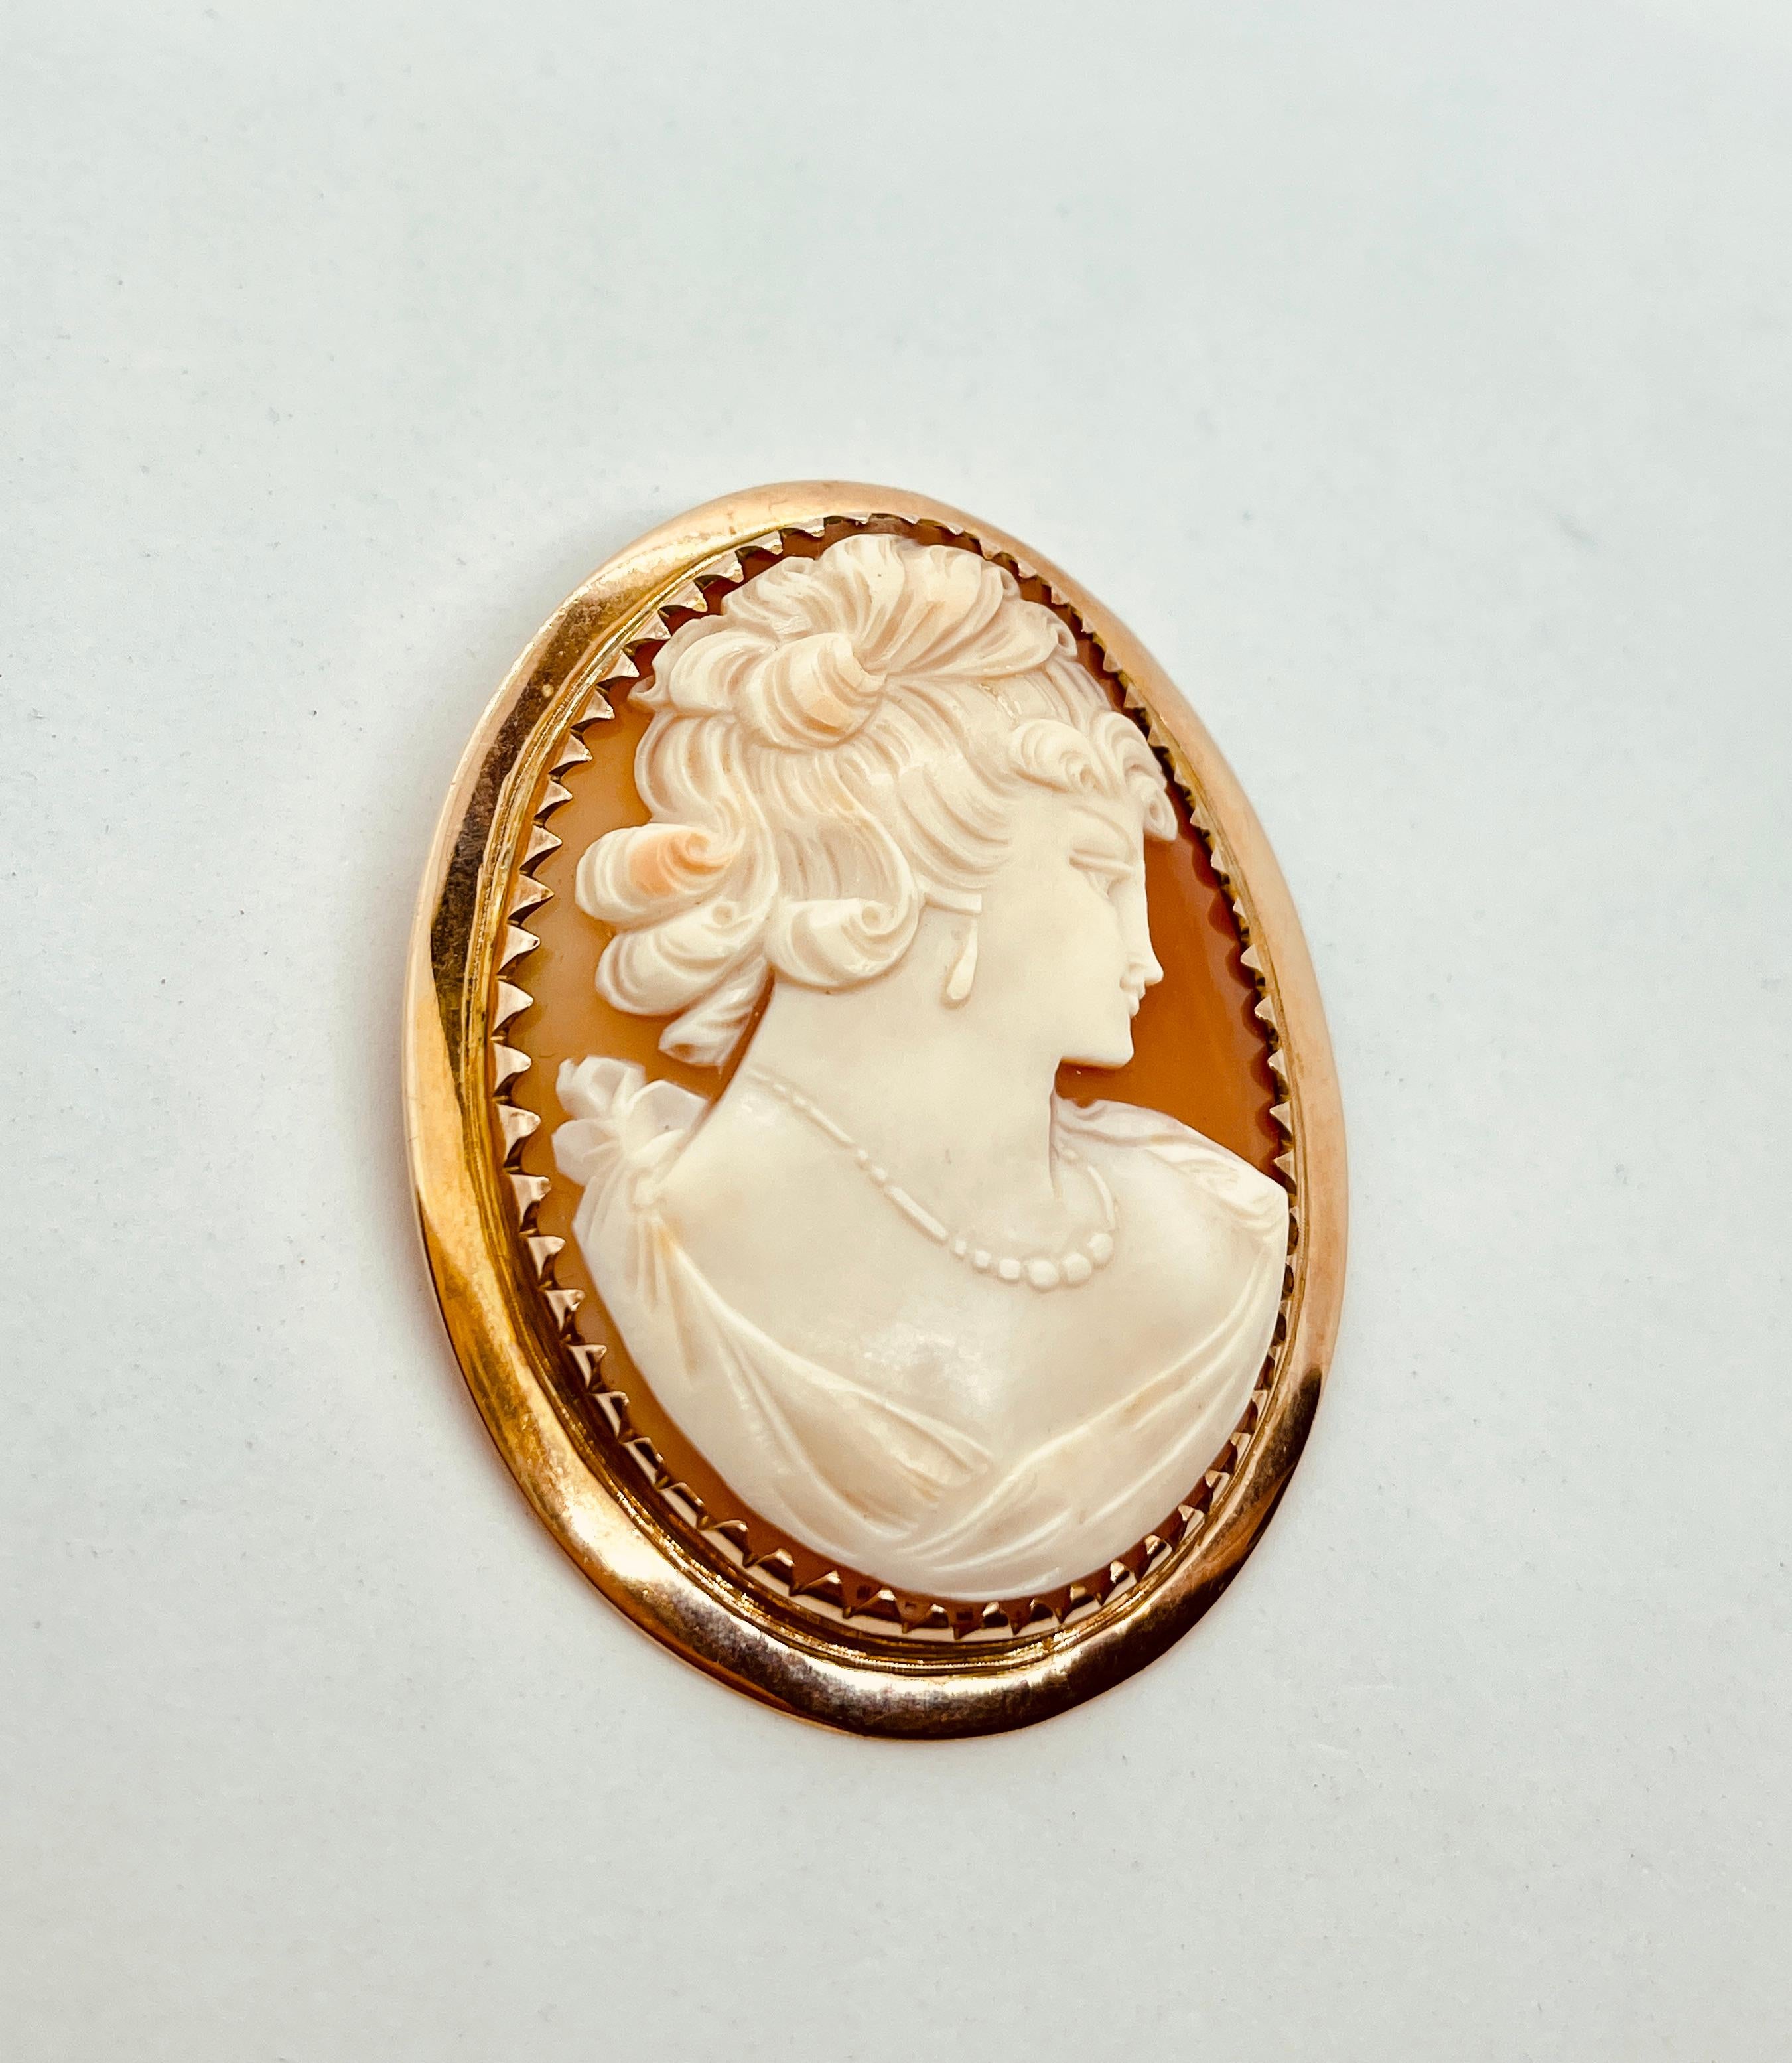 Vintage 9ct Gold Cameo Brooch NeoClassical Lady Wearing Earrings Necklace c1940s For Sale 8